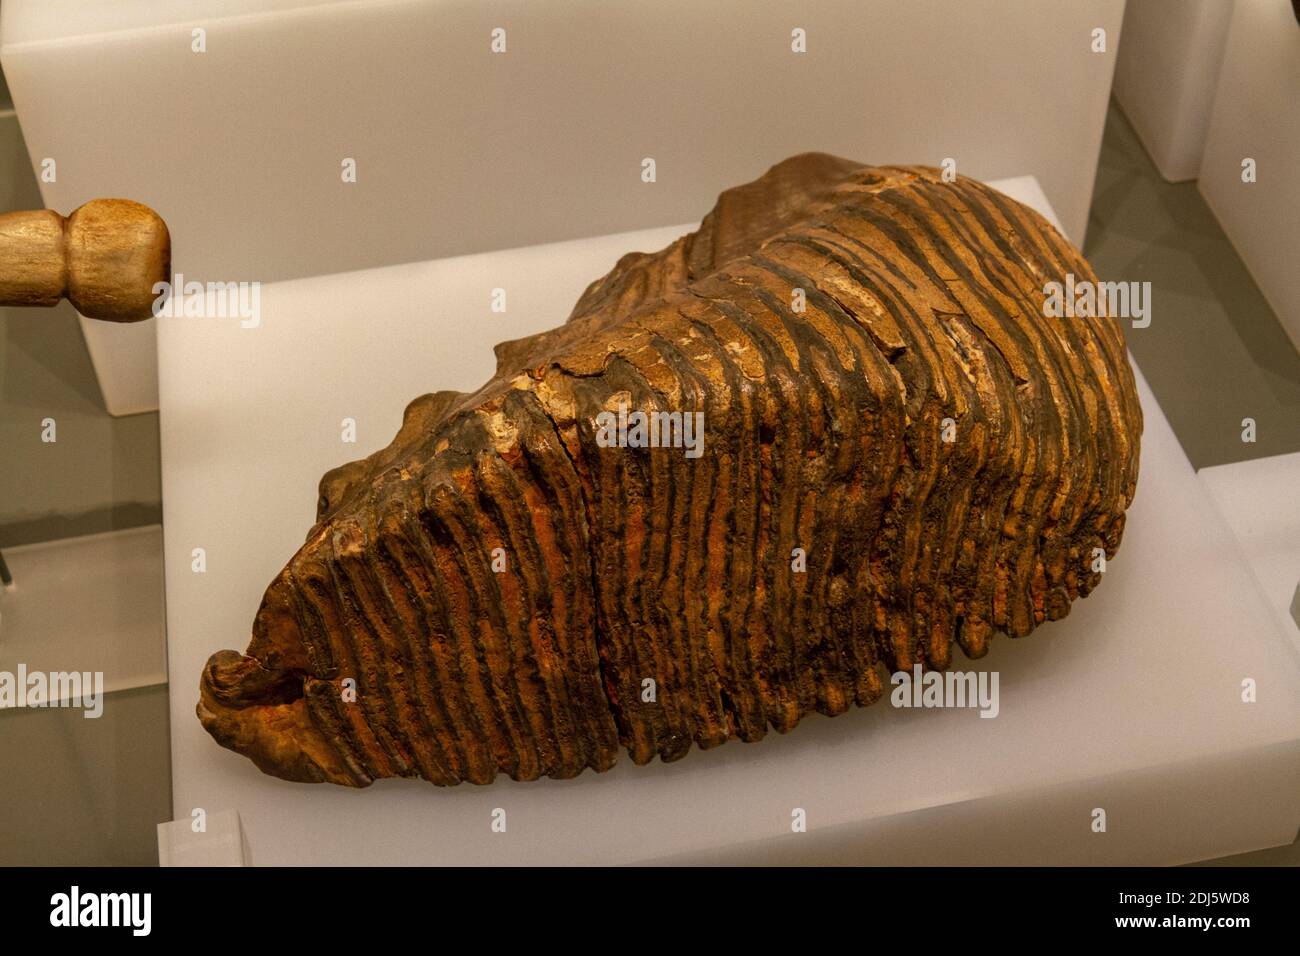 A fossilized mammoth tooth on display in the National Civil War Centre, Newark Museum, Newark-on-Trent, Notts, UK. Stock Photo